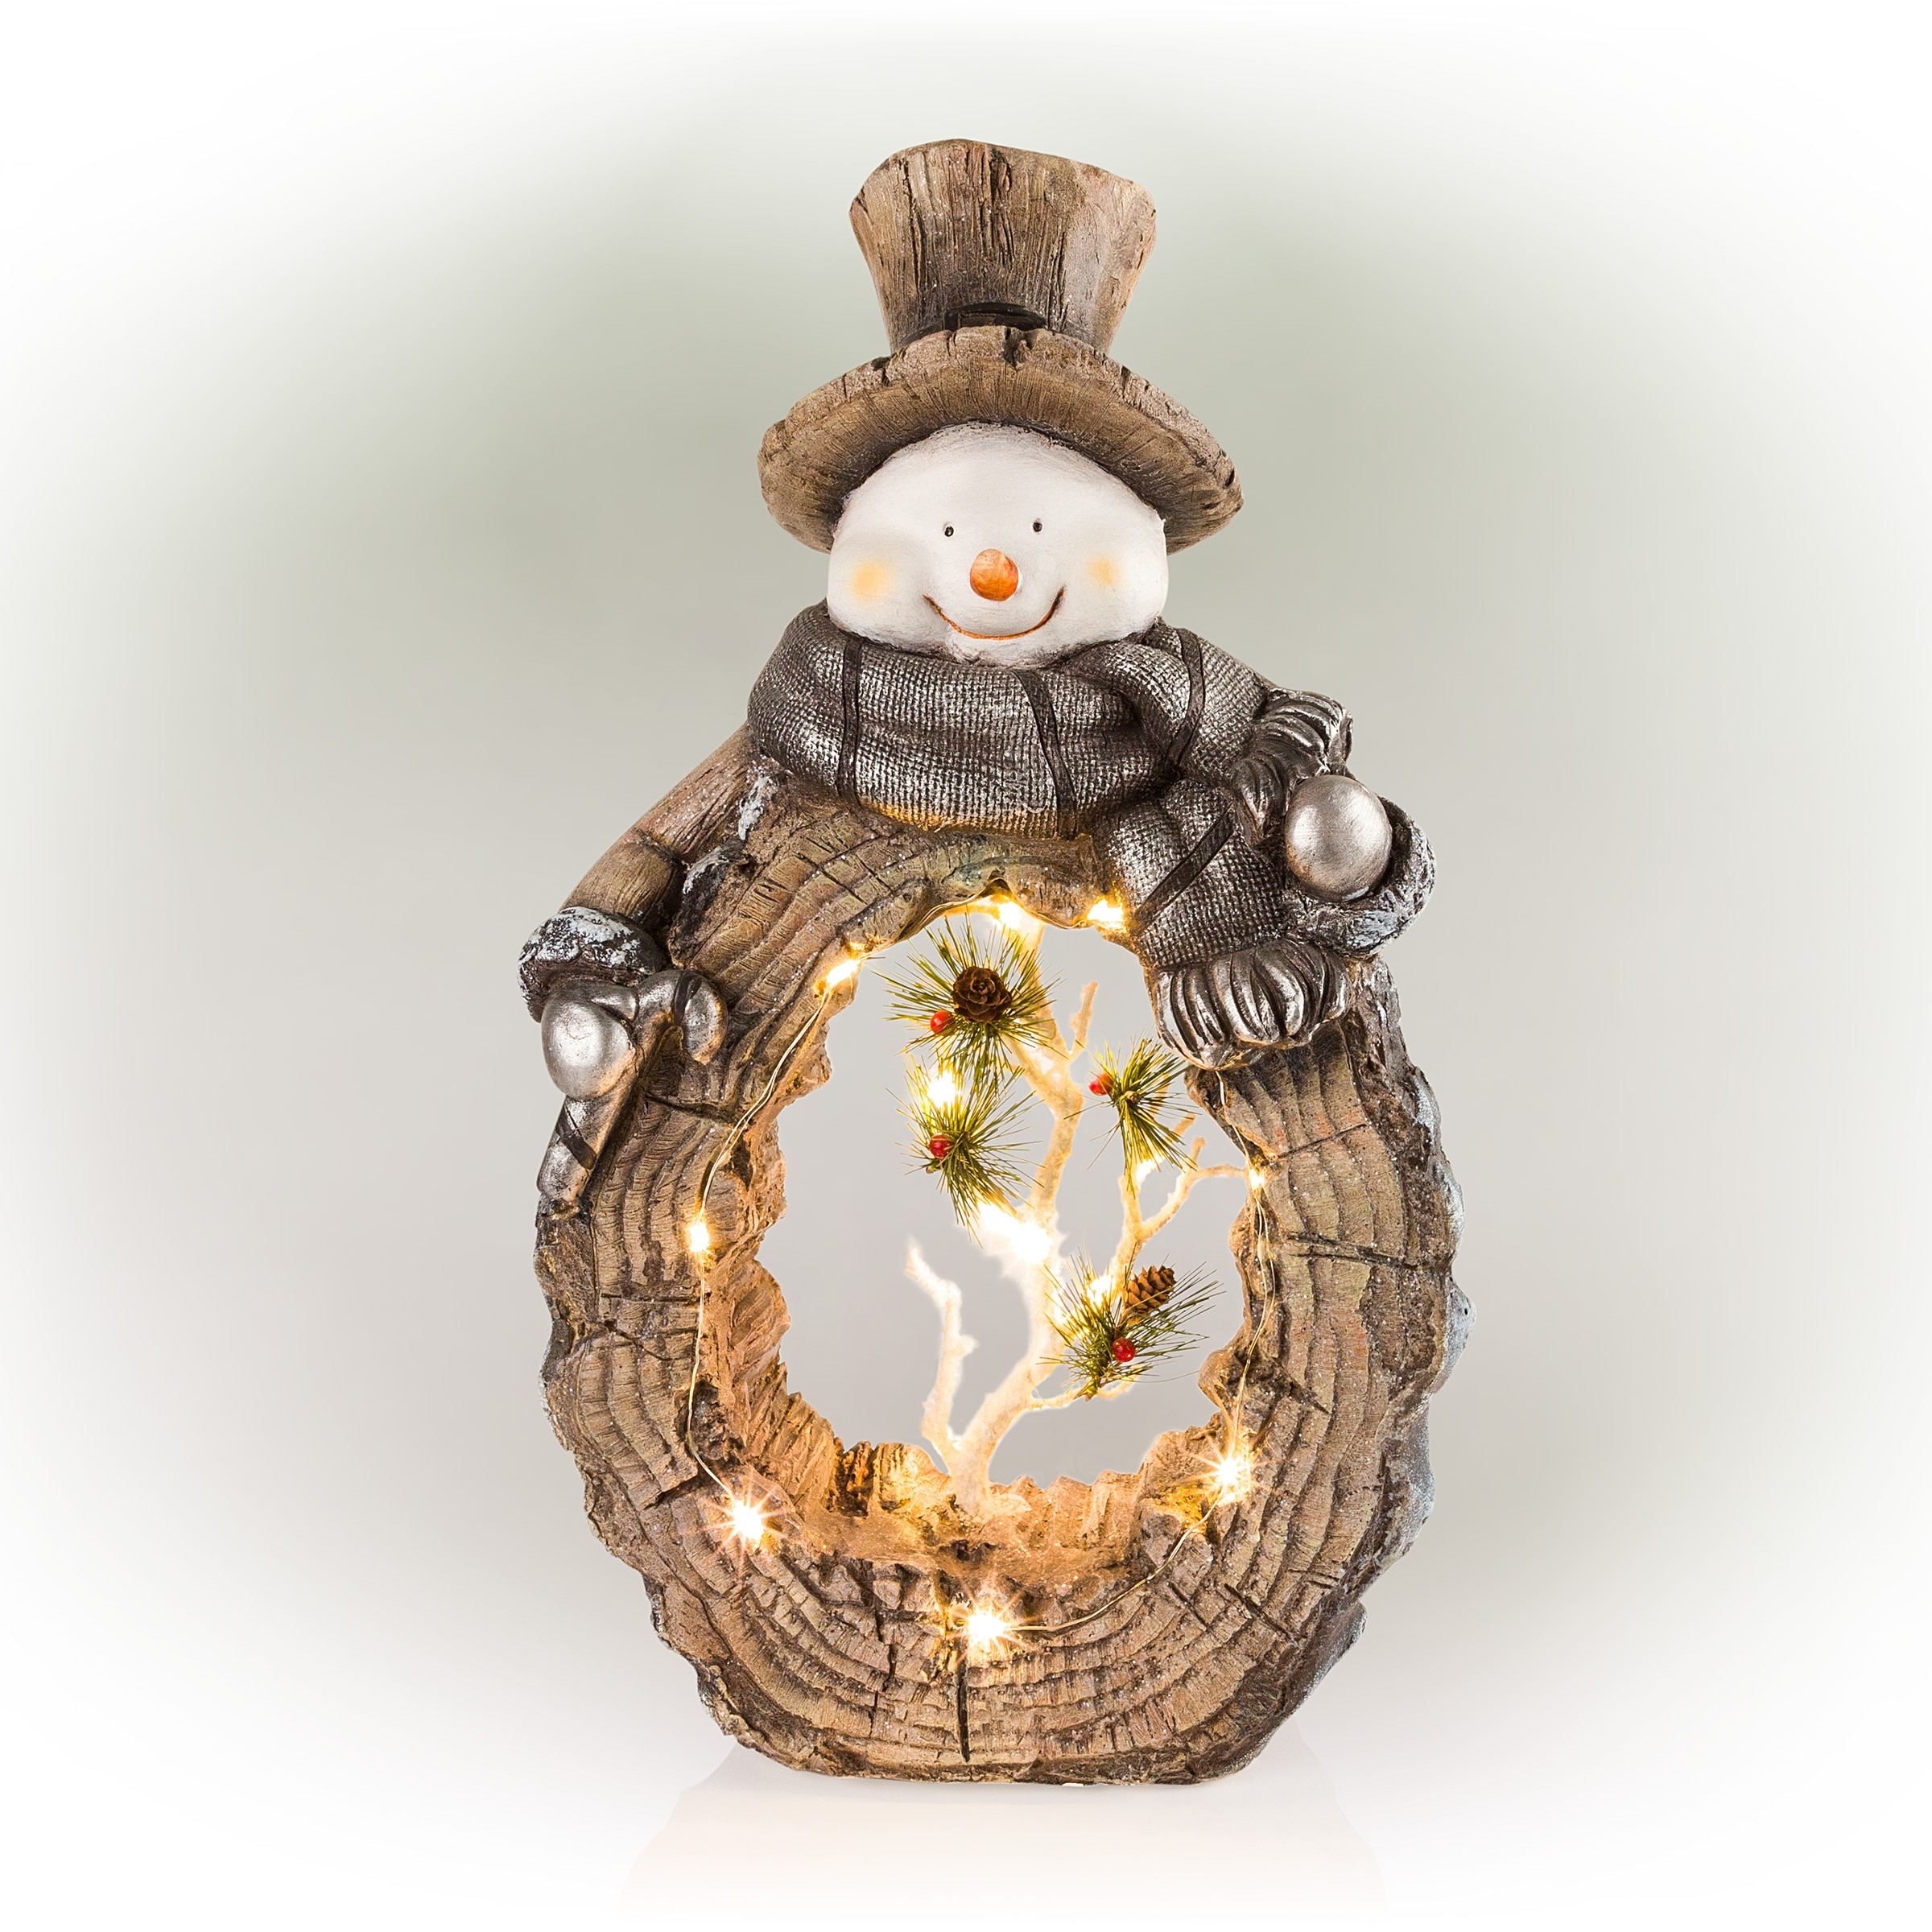 Snowman Statue with Carved Wood Look and LED Lights